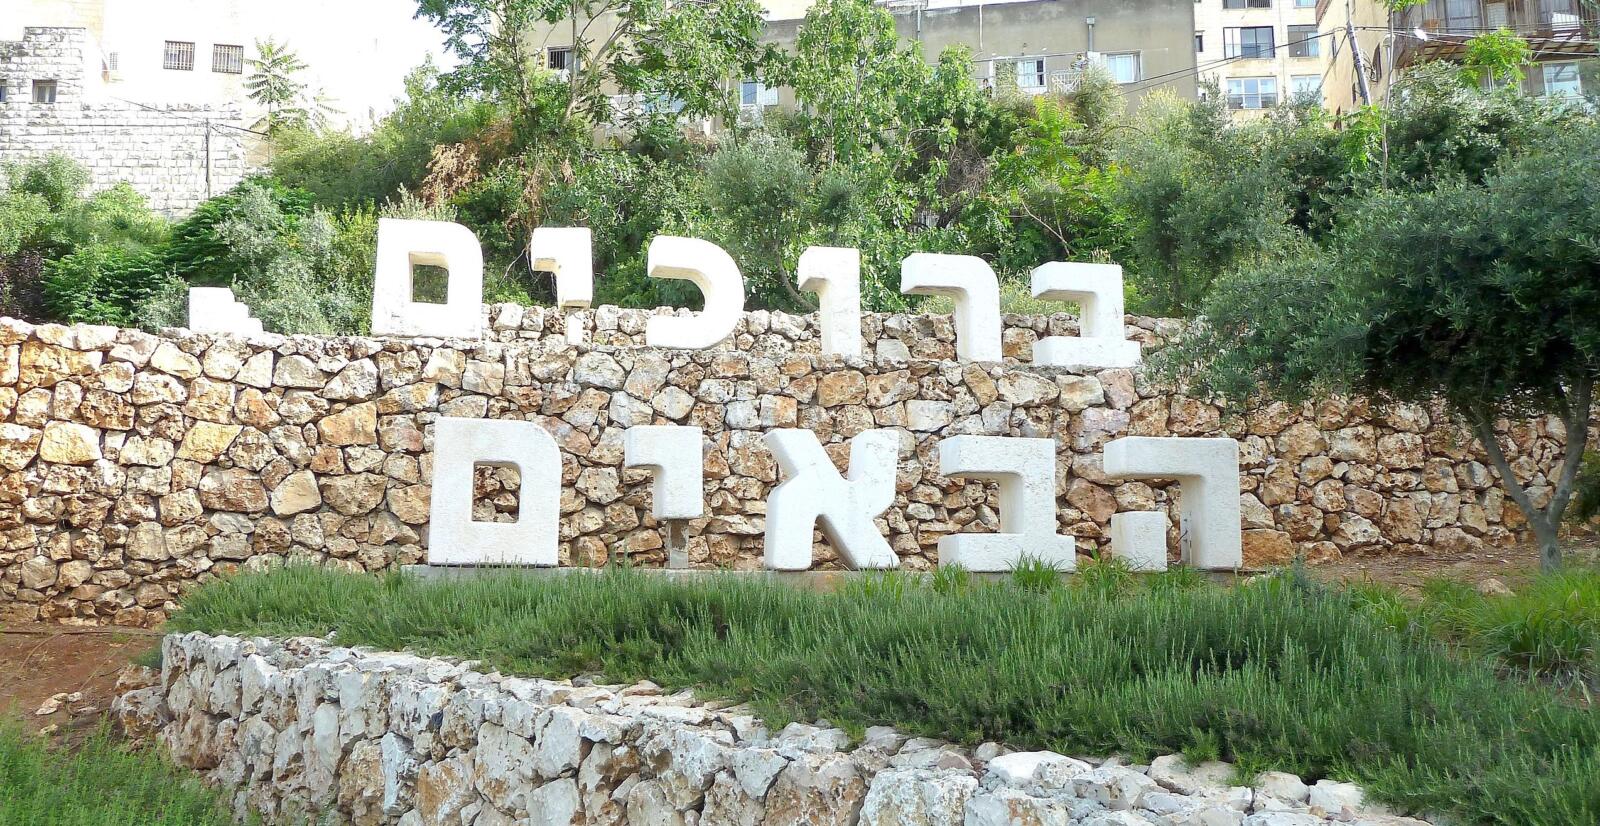 Photograph of a grassy hill with large white Hebrew letters.